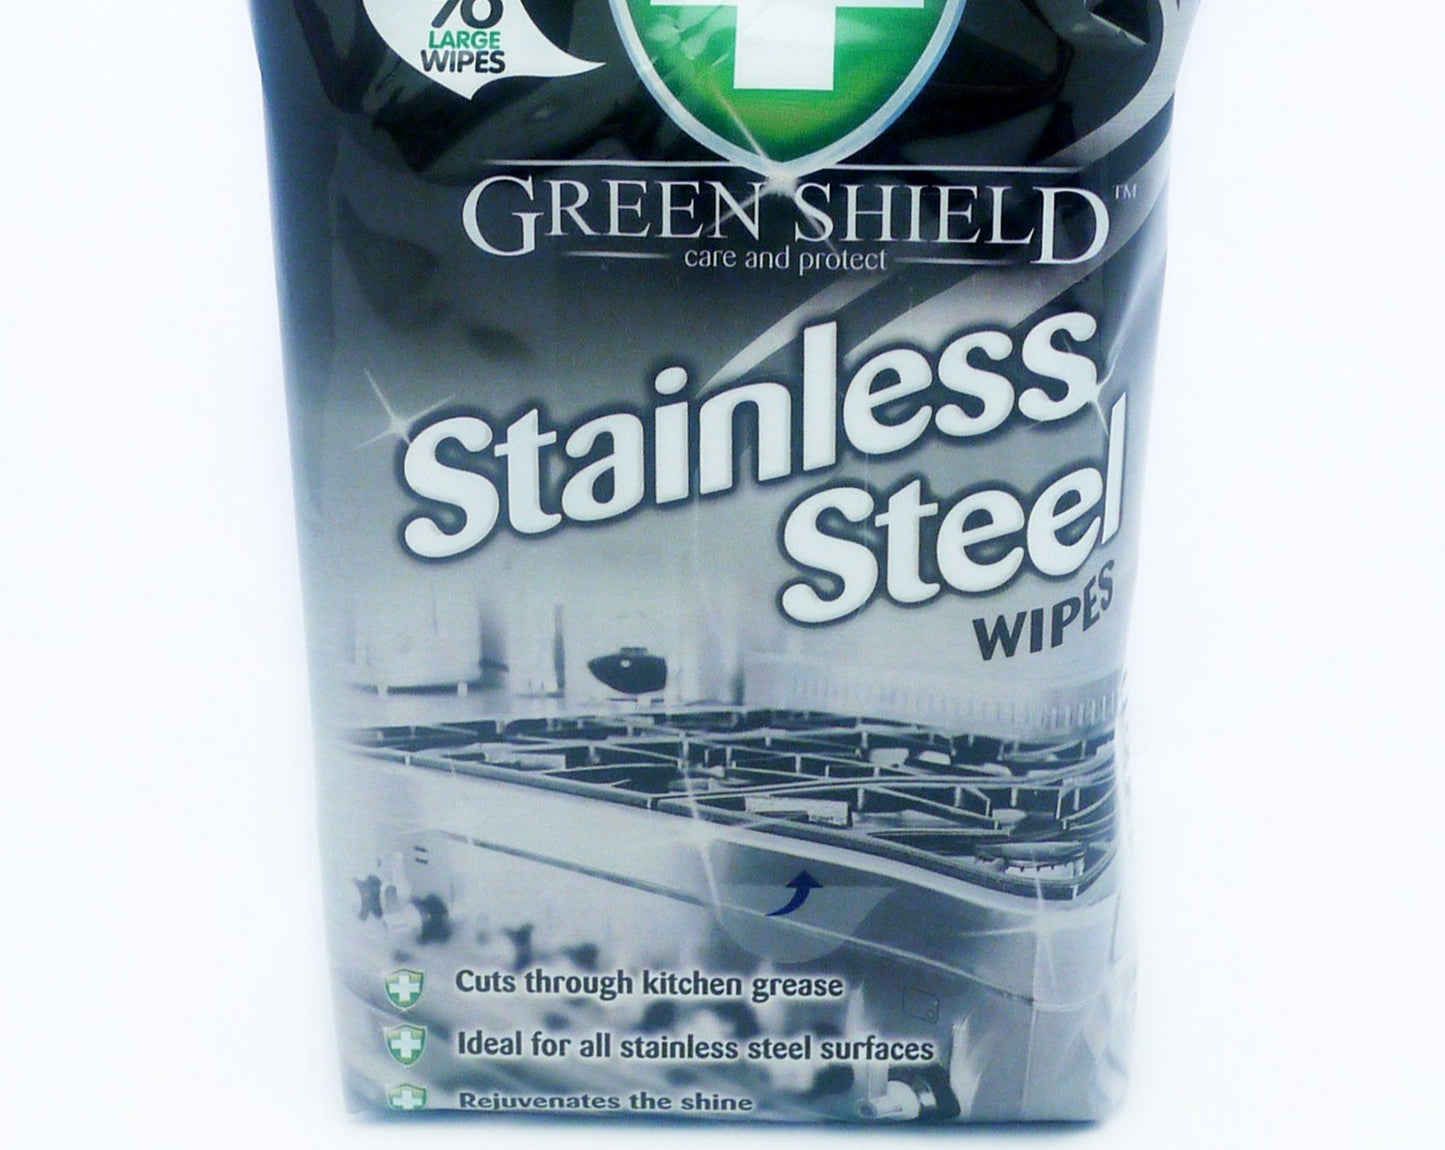 £1.49 Greenshield Stainless Steel Wipes (12)